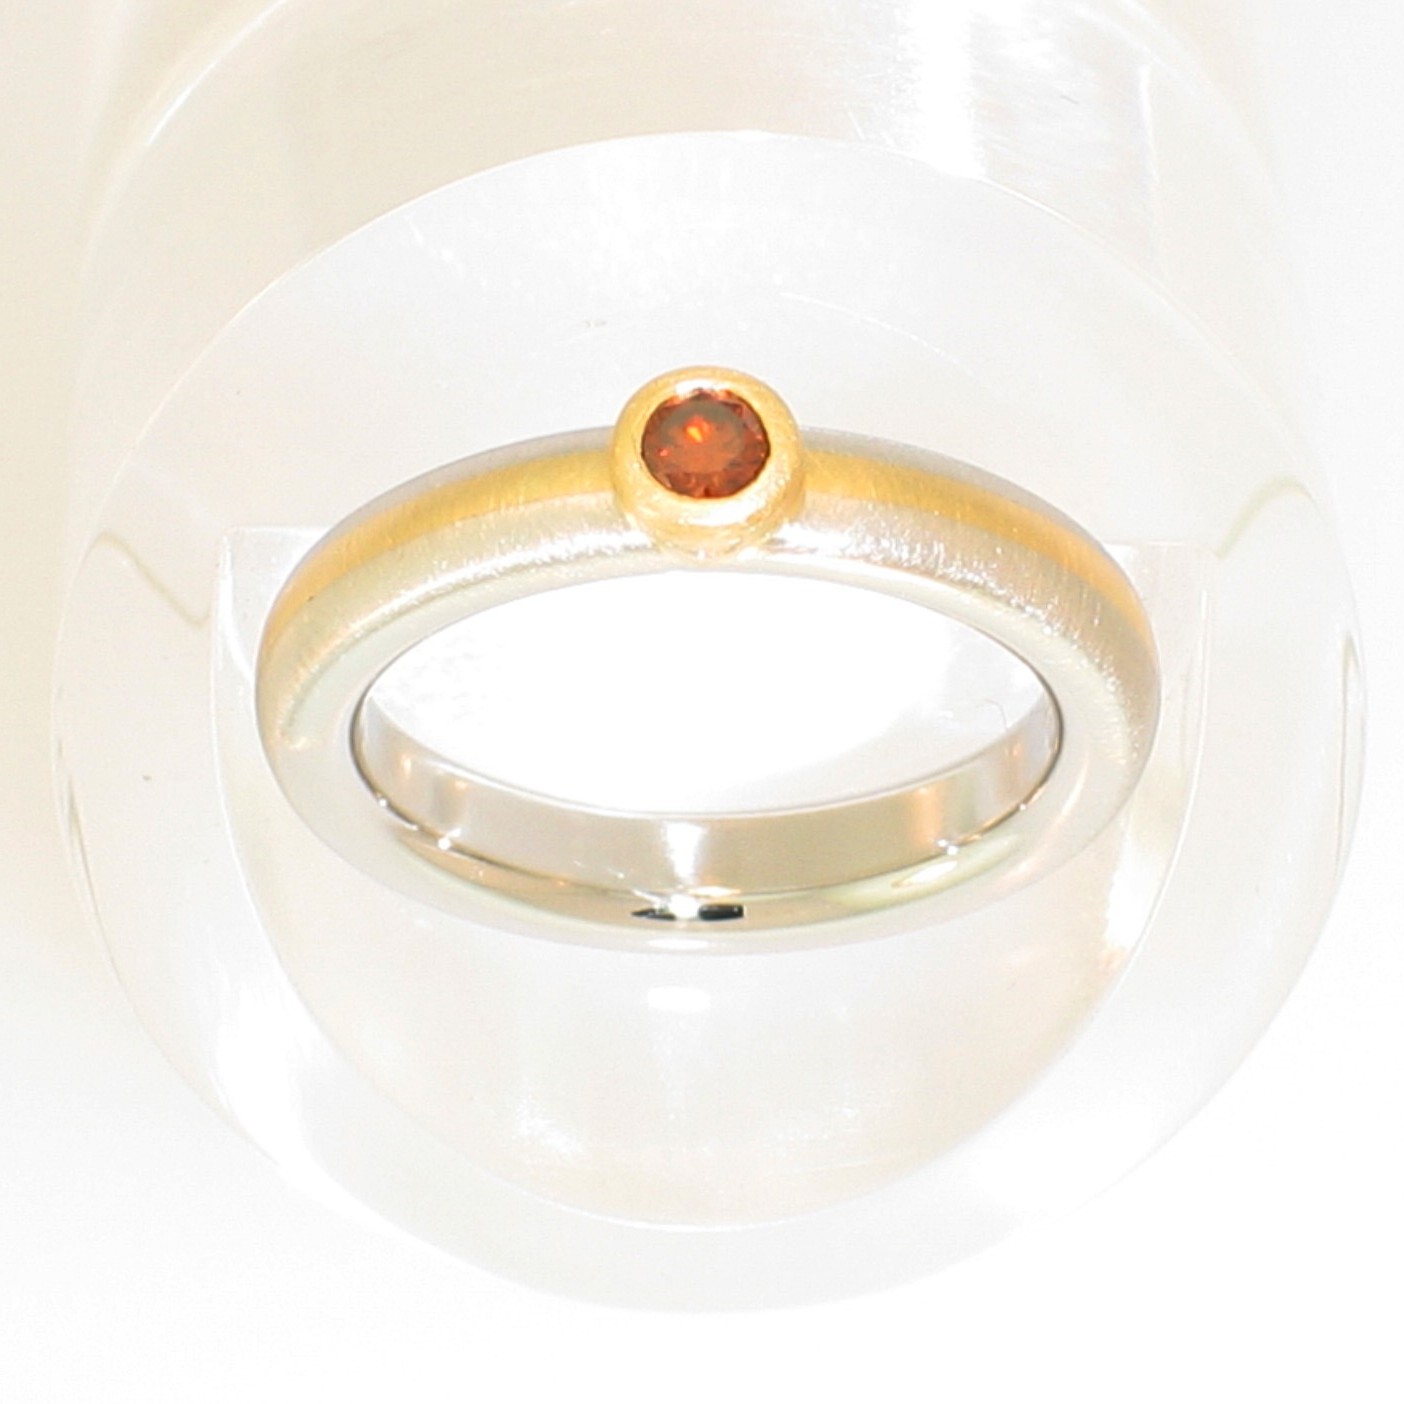 Platinum and 18 Karat Yellow Gold 2-tone matte-finished heavy band with natural-colored round orange diamond in 18 Karat Yellow Gold full bezel setting